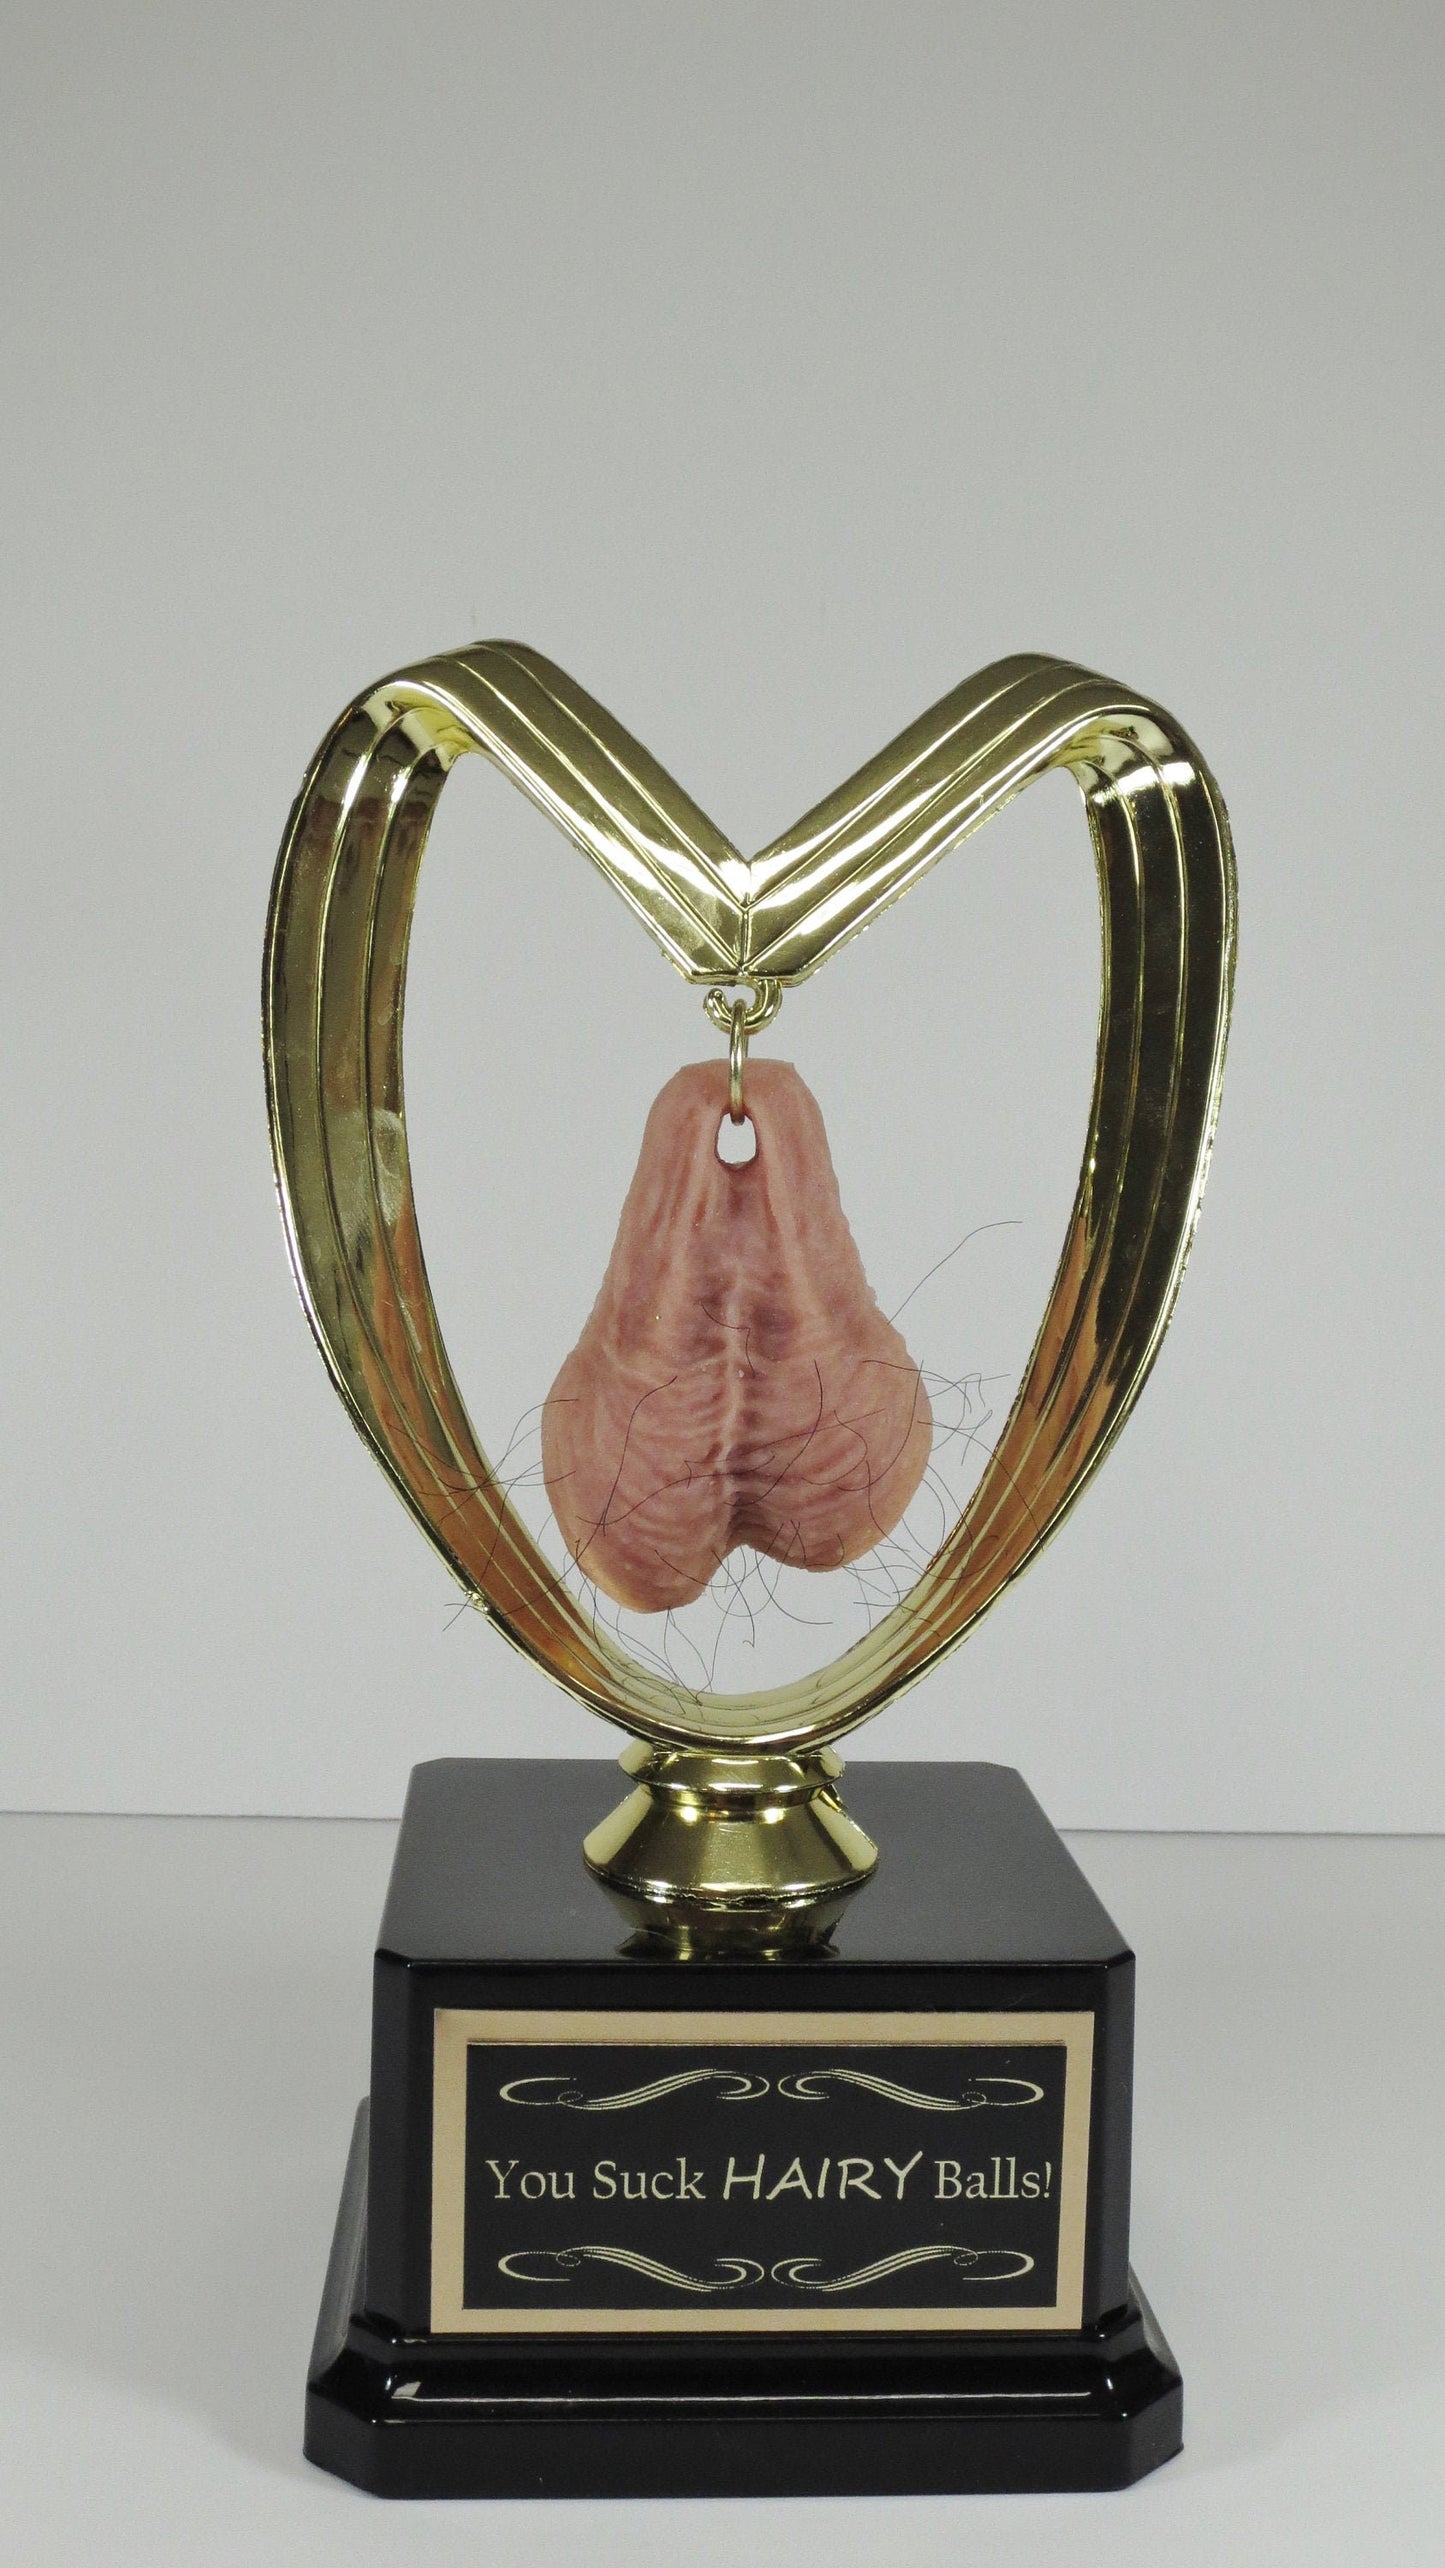 HAIRY BALLS All N' All You're Just Another Pube On The Ball Funny Trophy You Suck Loser Trophy FFL Sacko Adult Humor Gag Gift Testicle